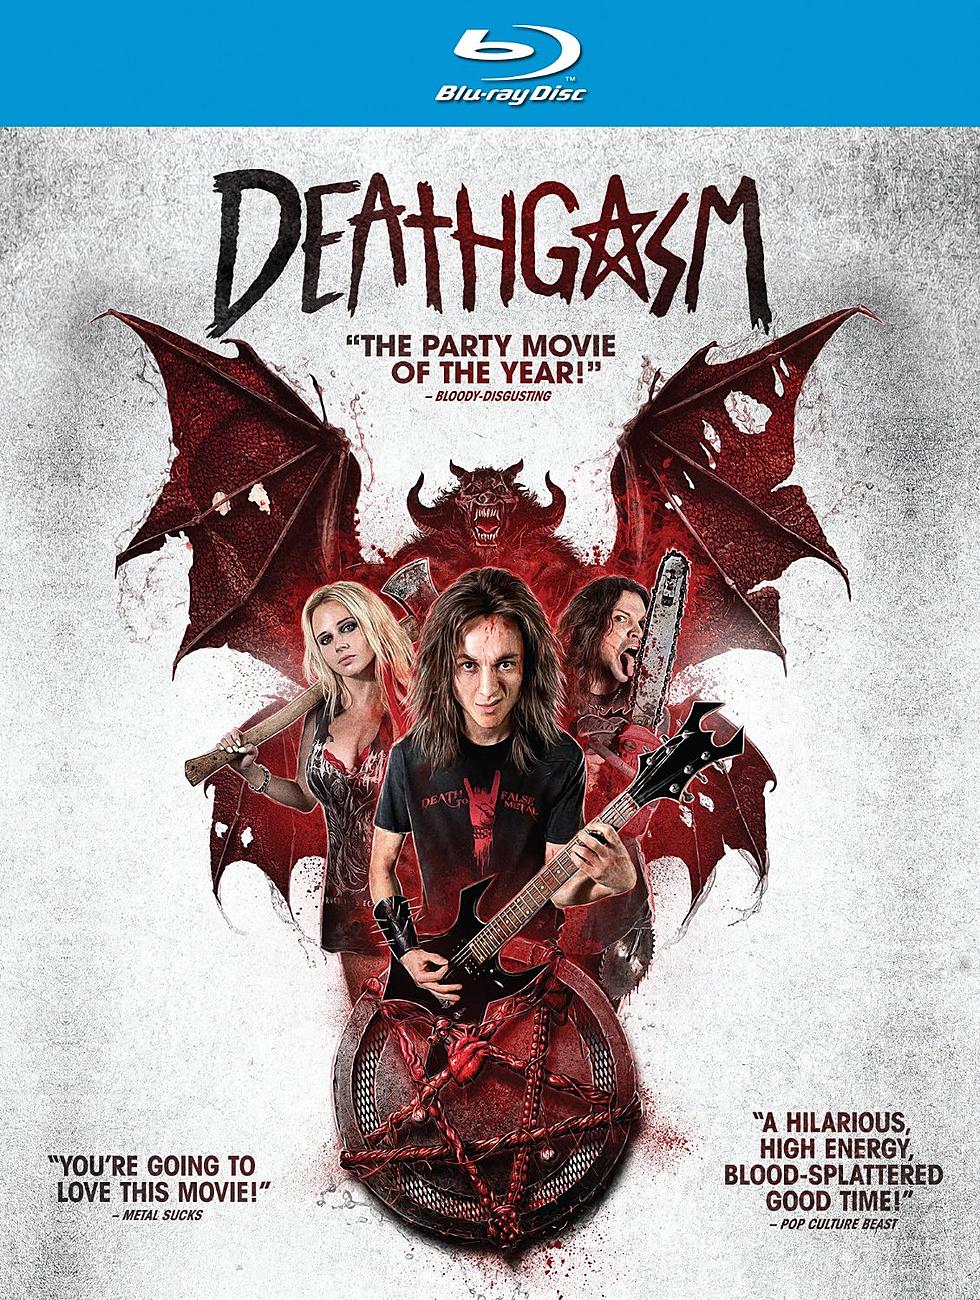 Walmart Doesn’t Like the Cover Art or Title to the Movie Deathgasm